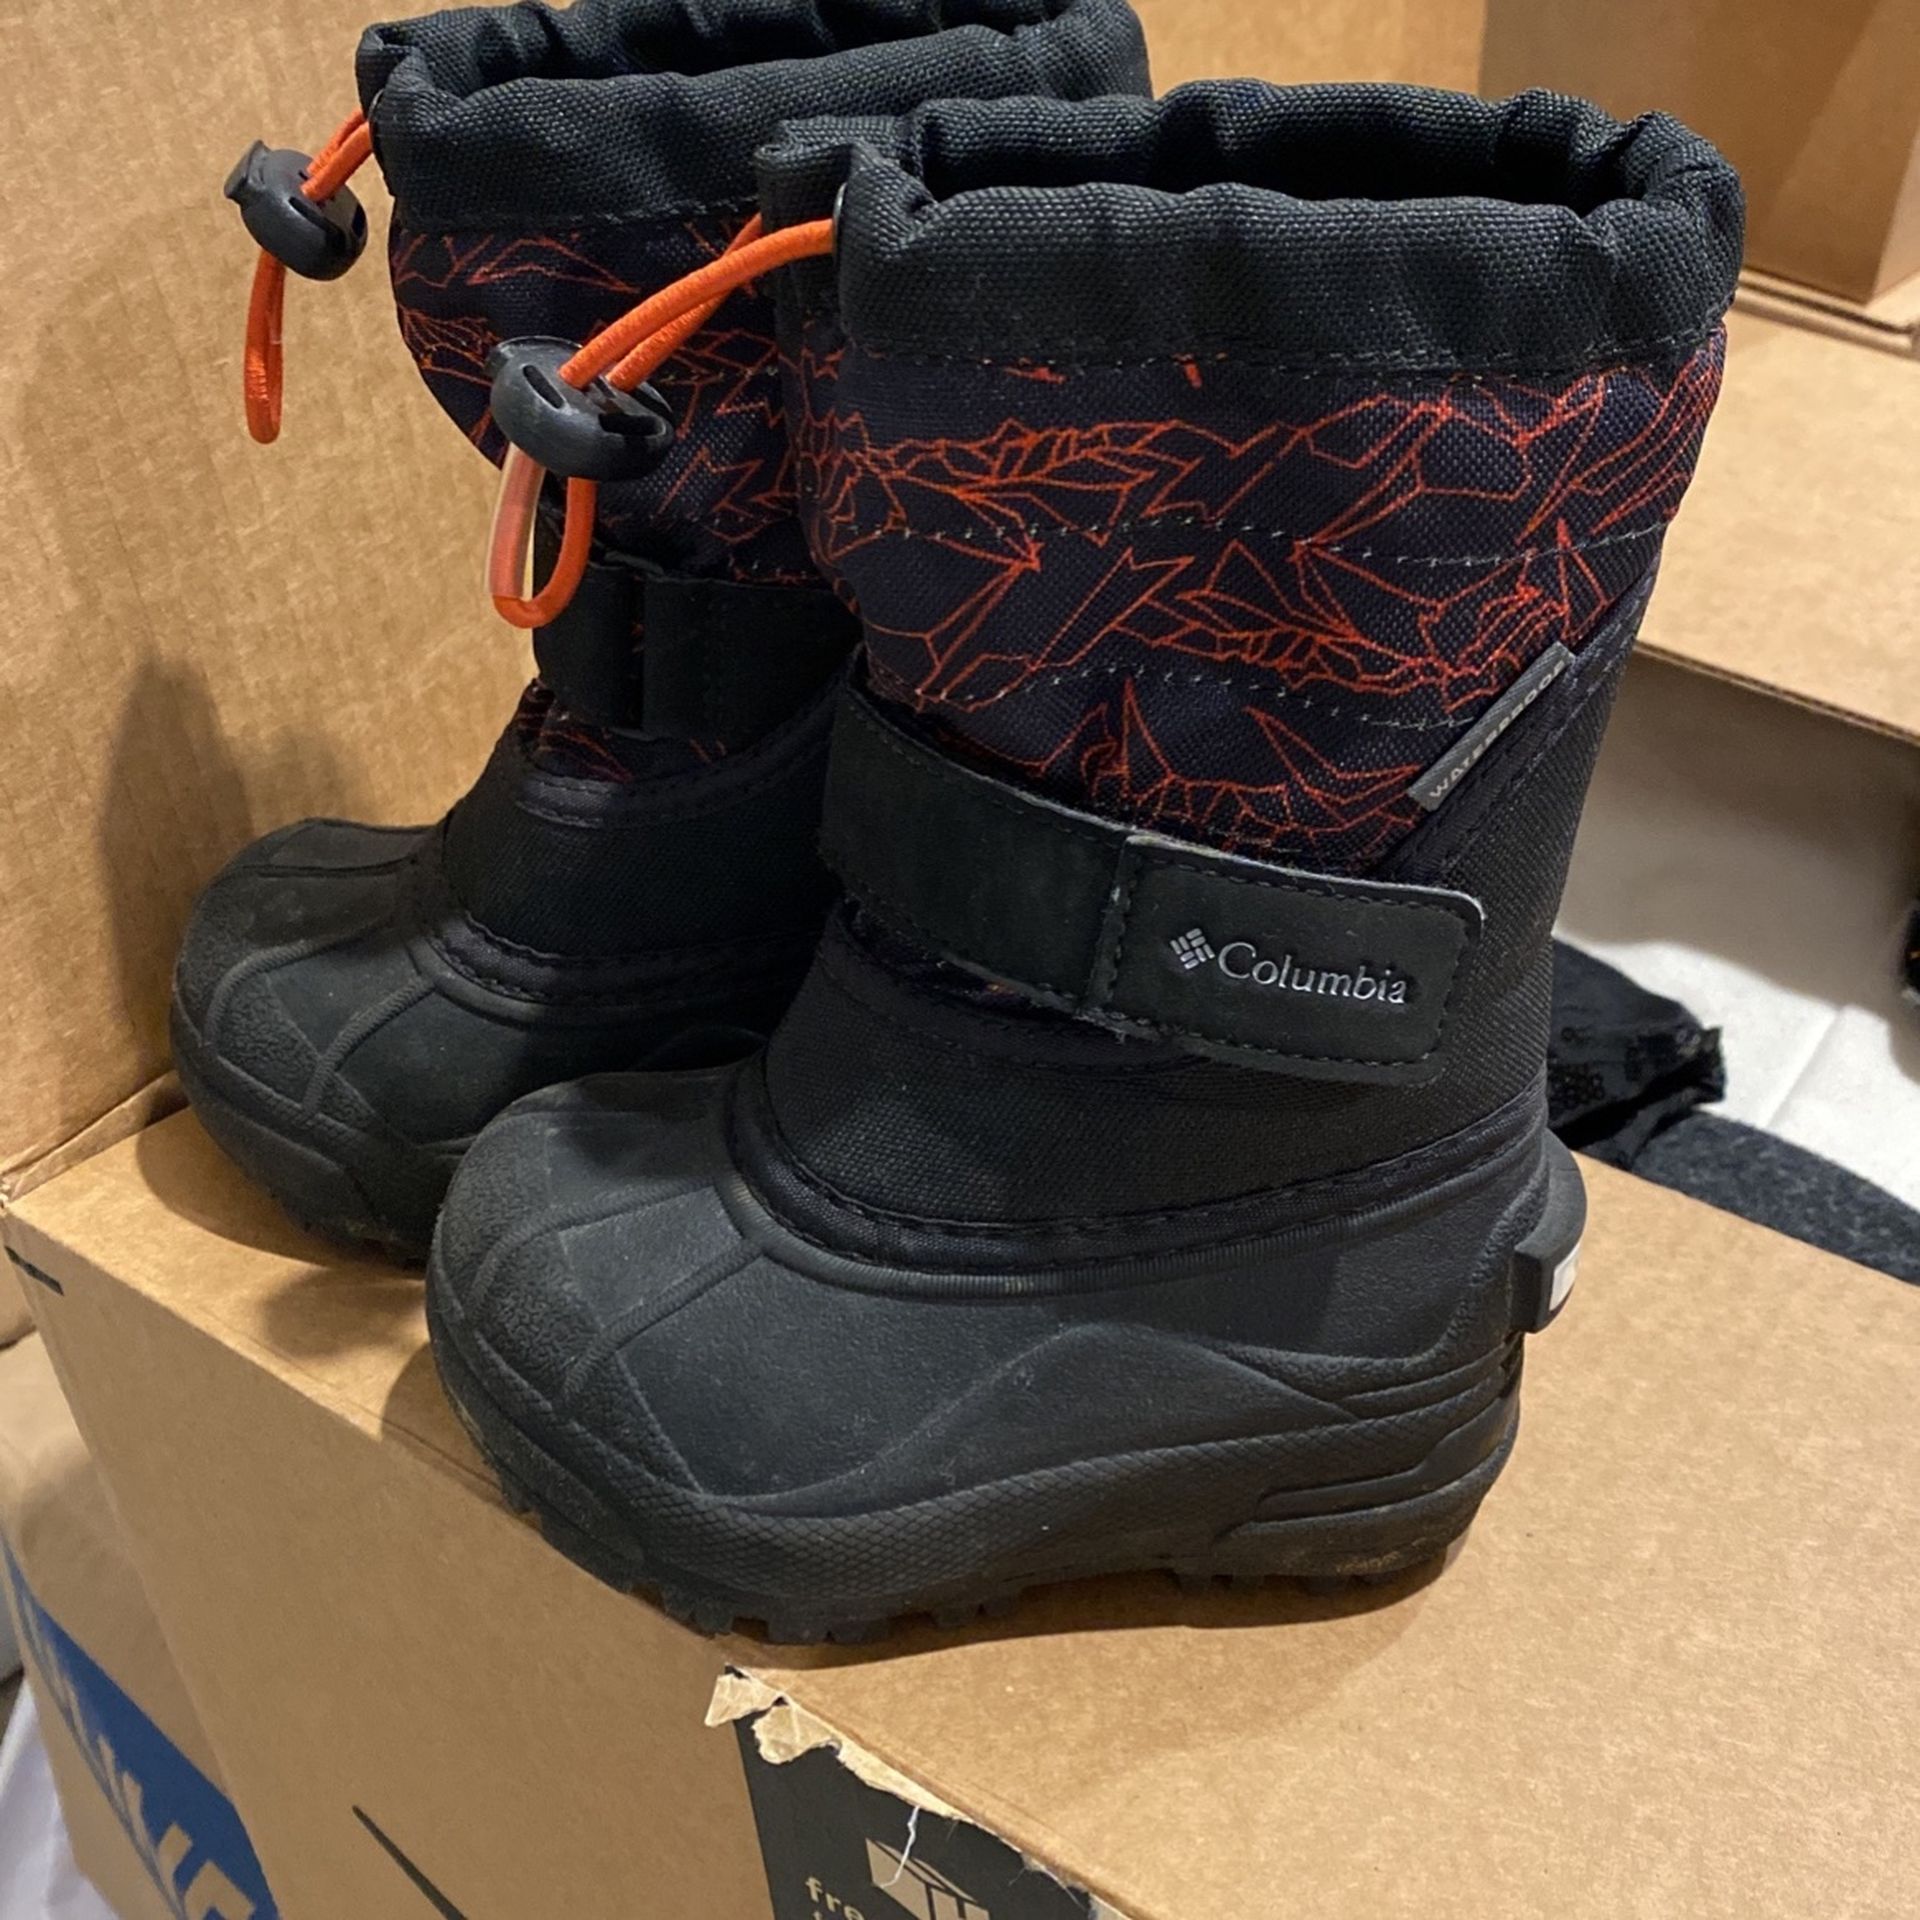 Colombia Waterproof Toddler Boots Size 6